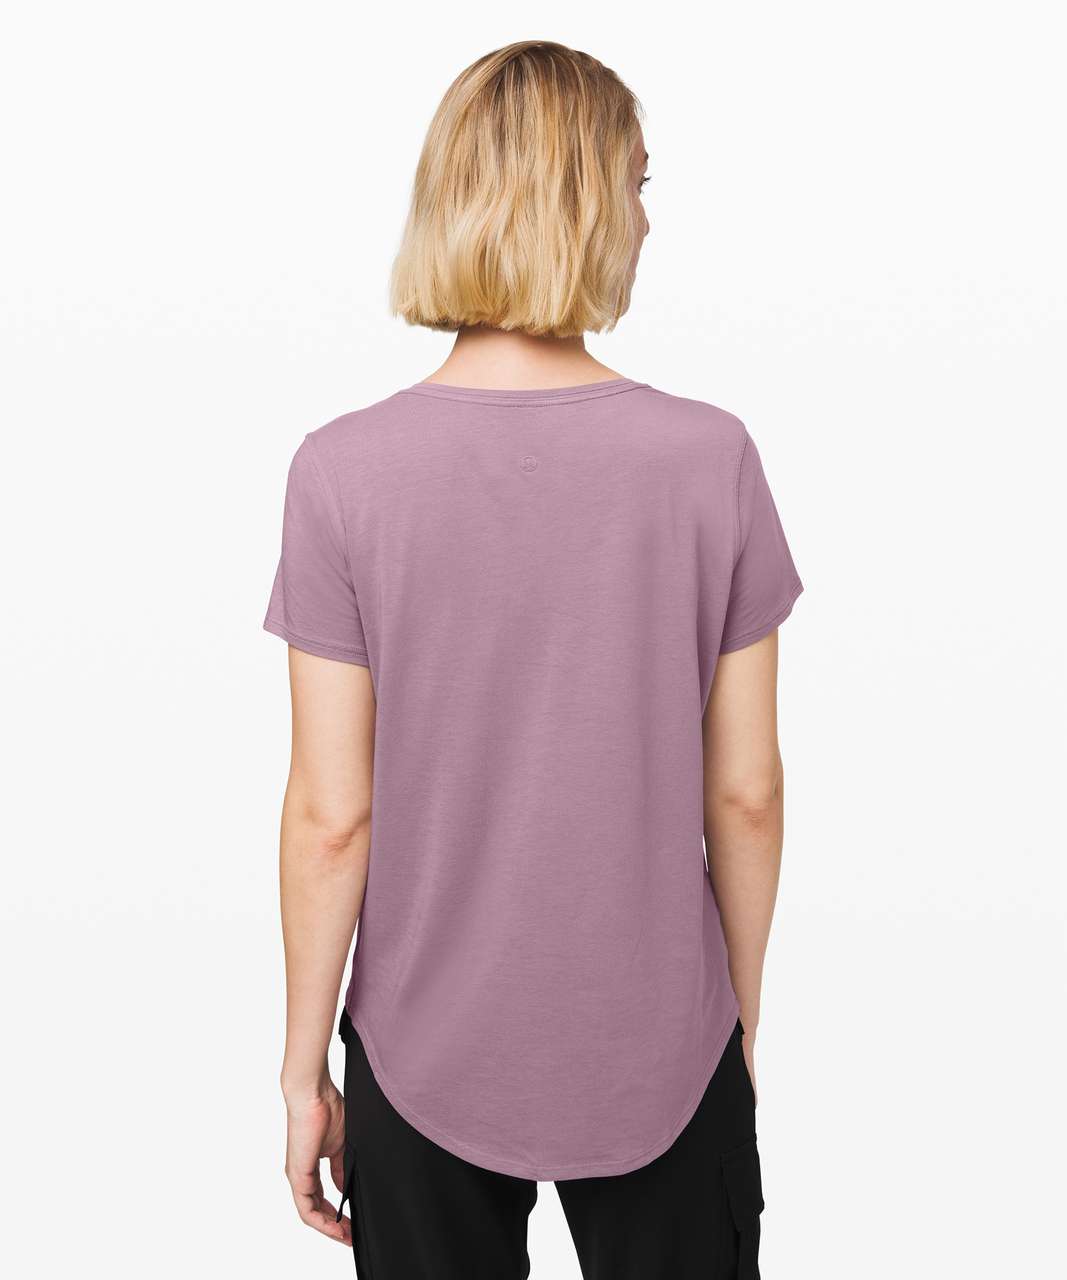 Lululemon Love Crew III - Frosted Mulberry